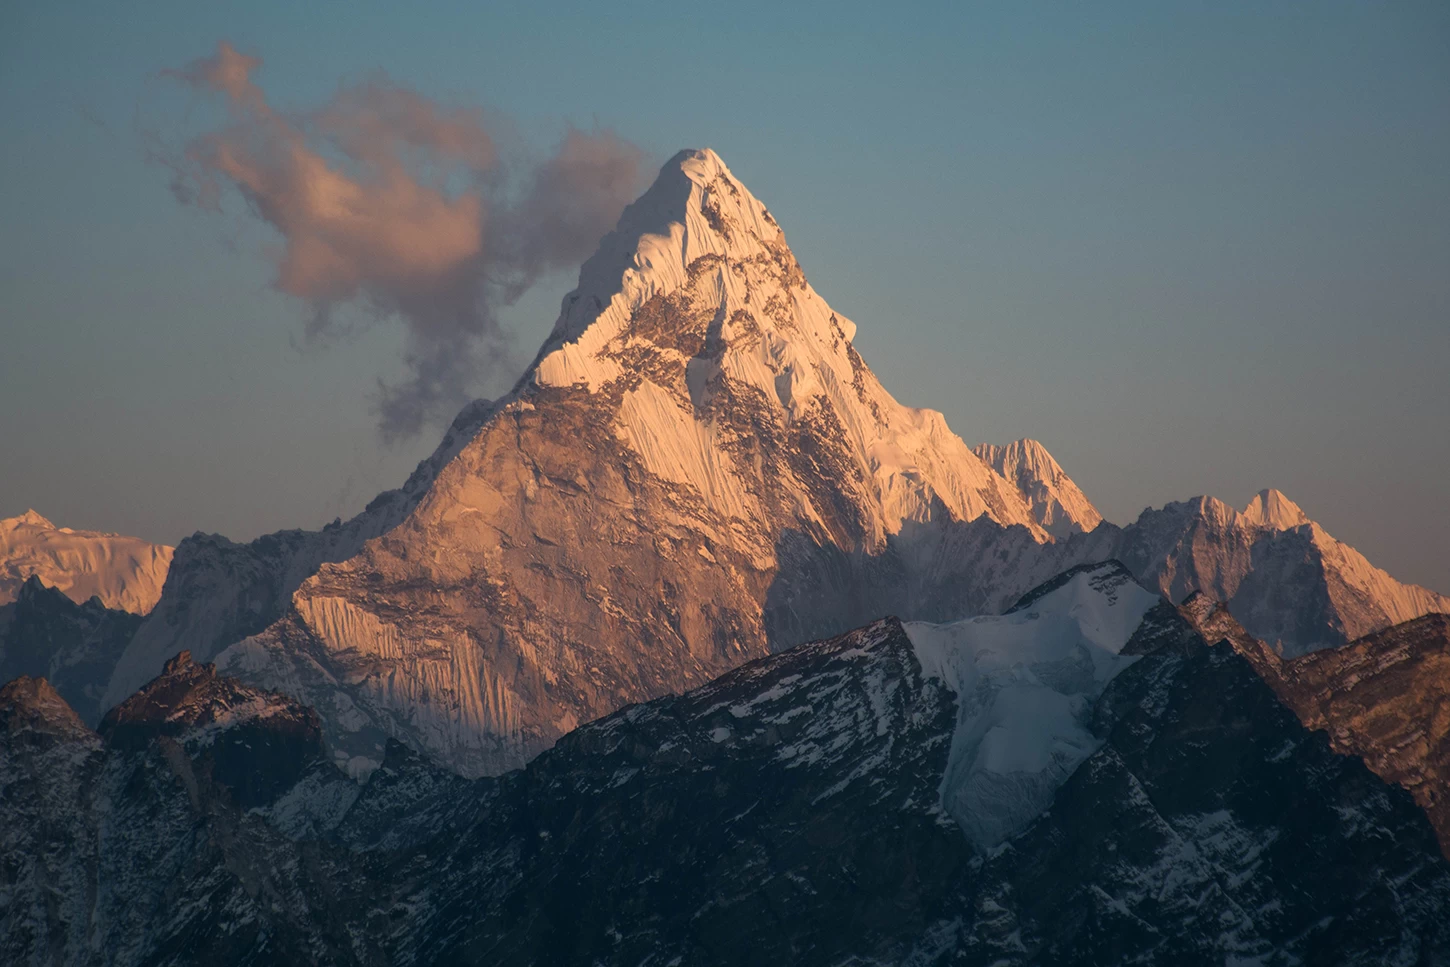  Mount Ama Dablam, view from Kalapatthar 5,560m. 